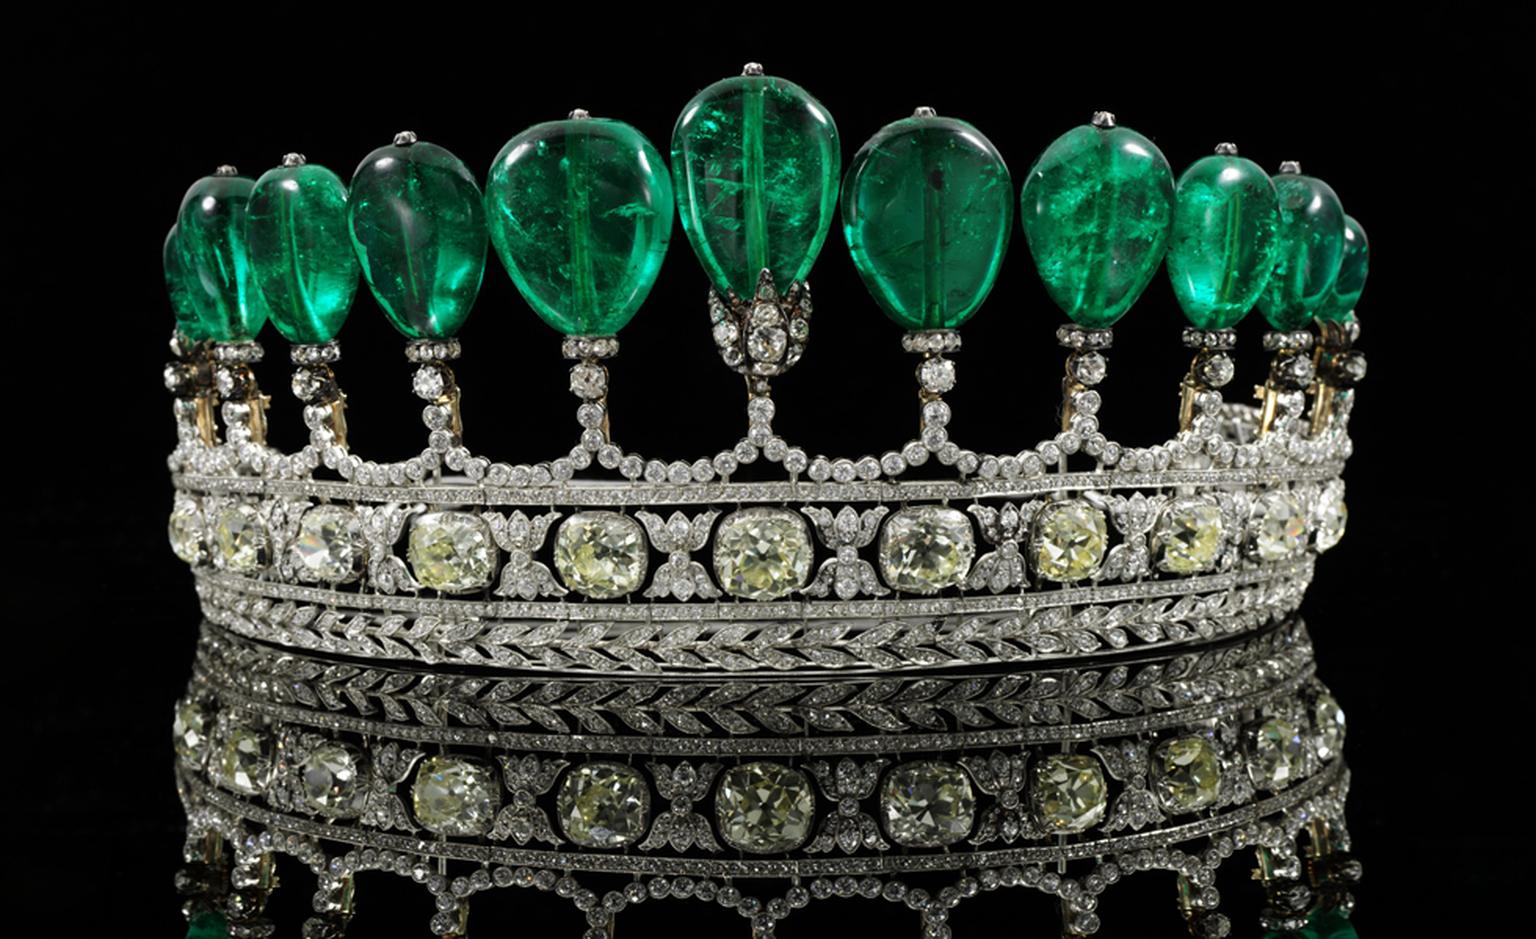 This rare emerald tiara broke auction records as the highest price paid for a tiara